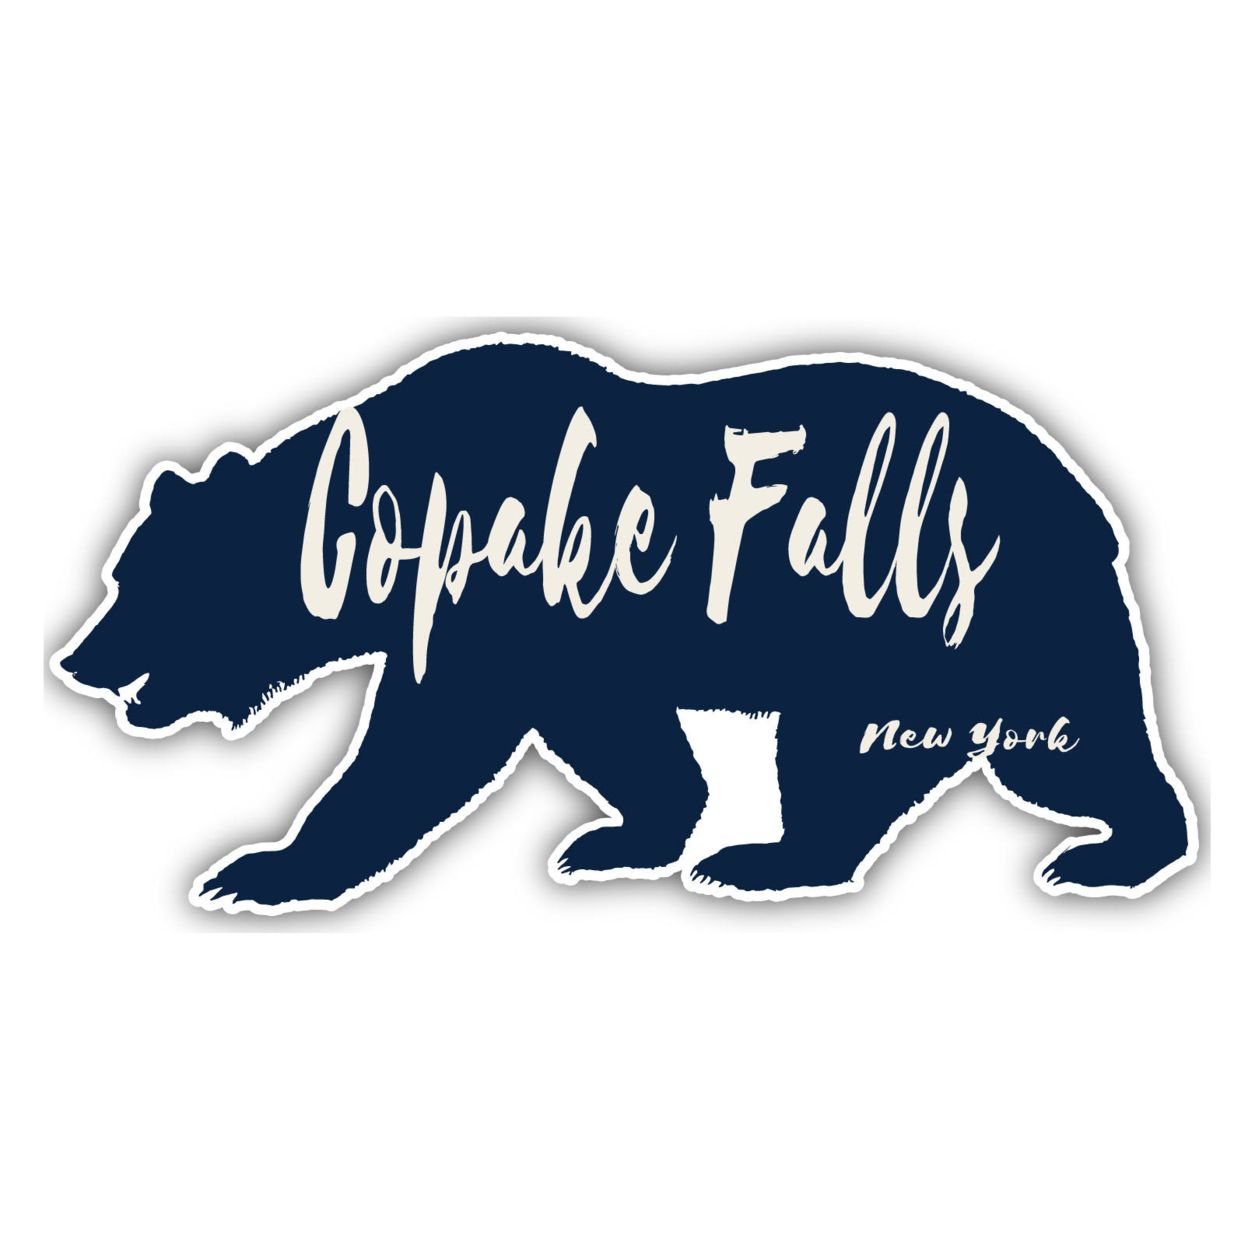 Copake Falls New York Souvenir Decorative Stickers (Choose Theme And Size) - 4-Pack, 8-Inch, Bear